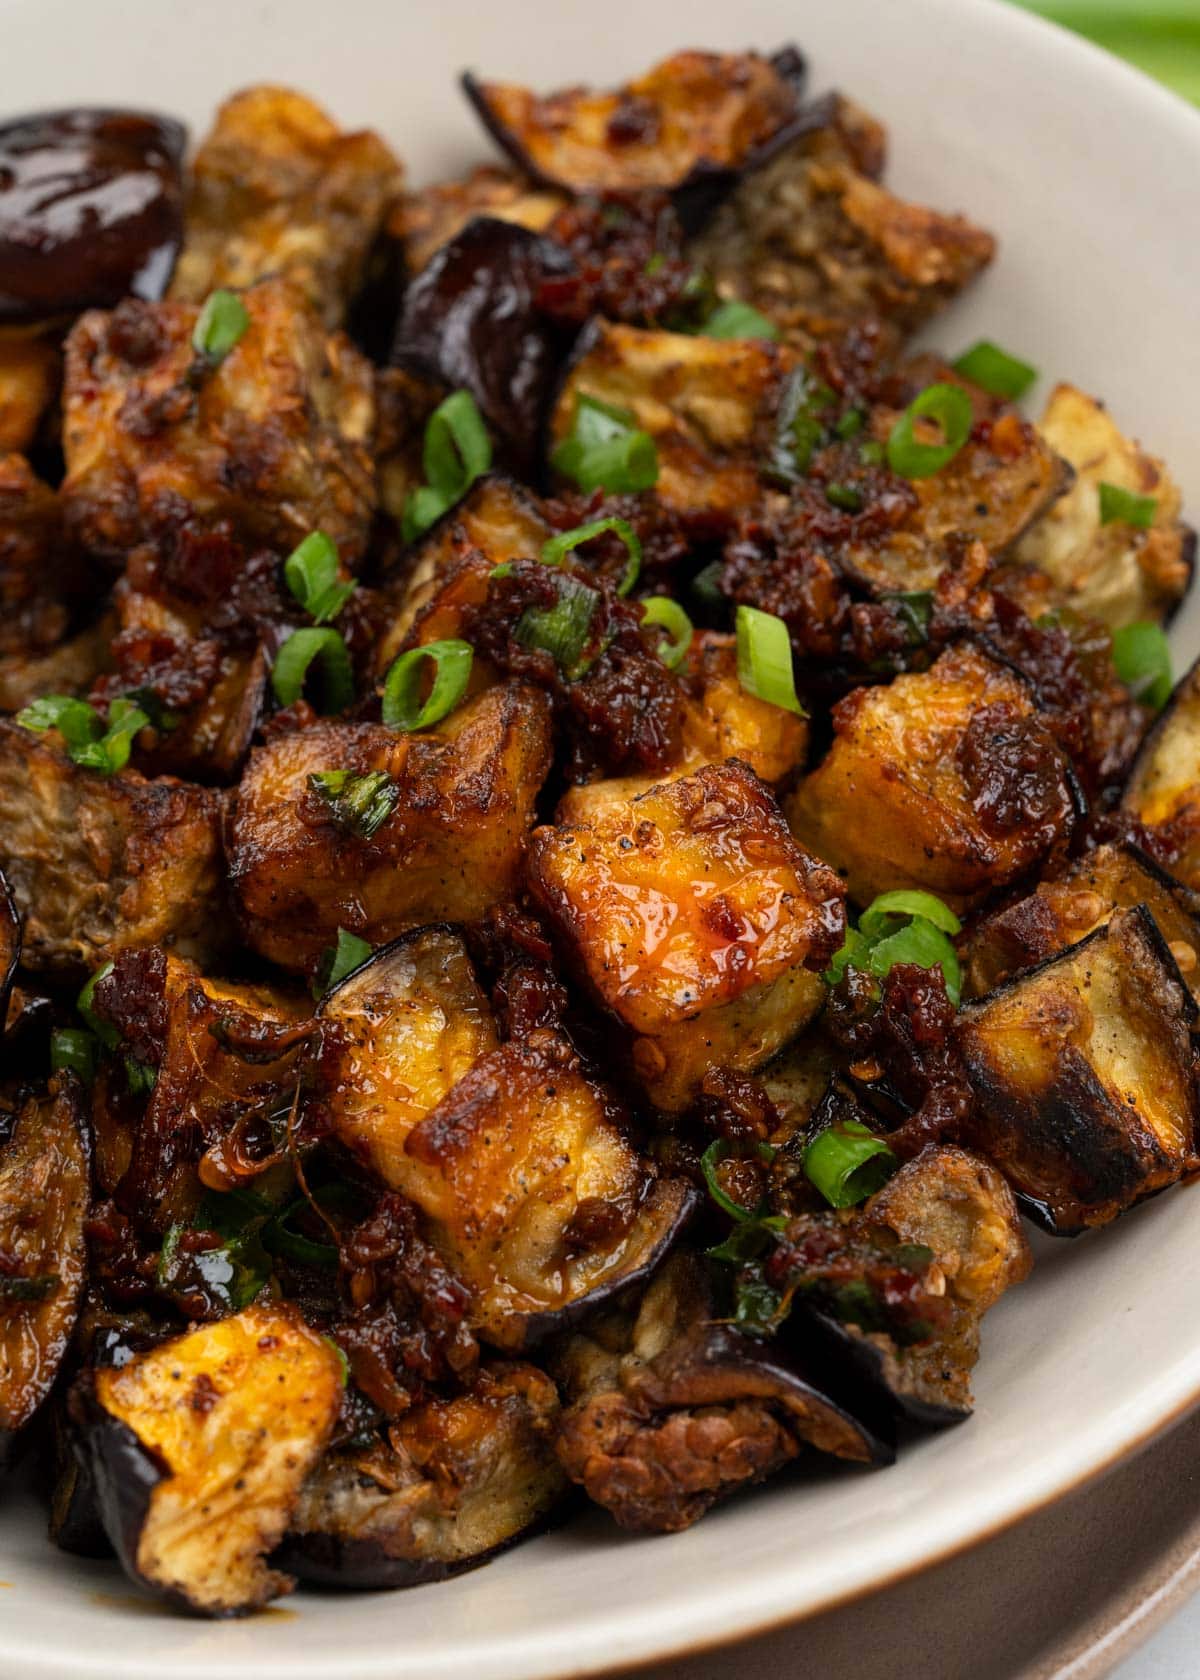 Crispy Air fryer eggplants tossed in Chilli oil dressing and a garnish of green onion.